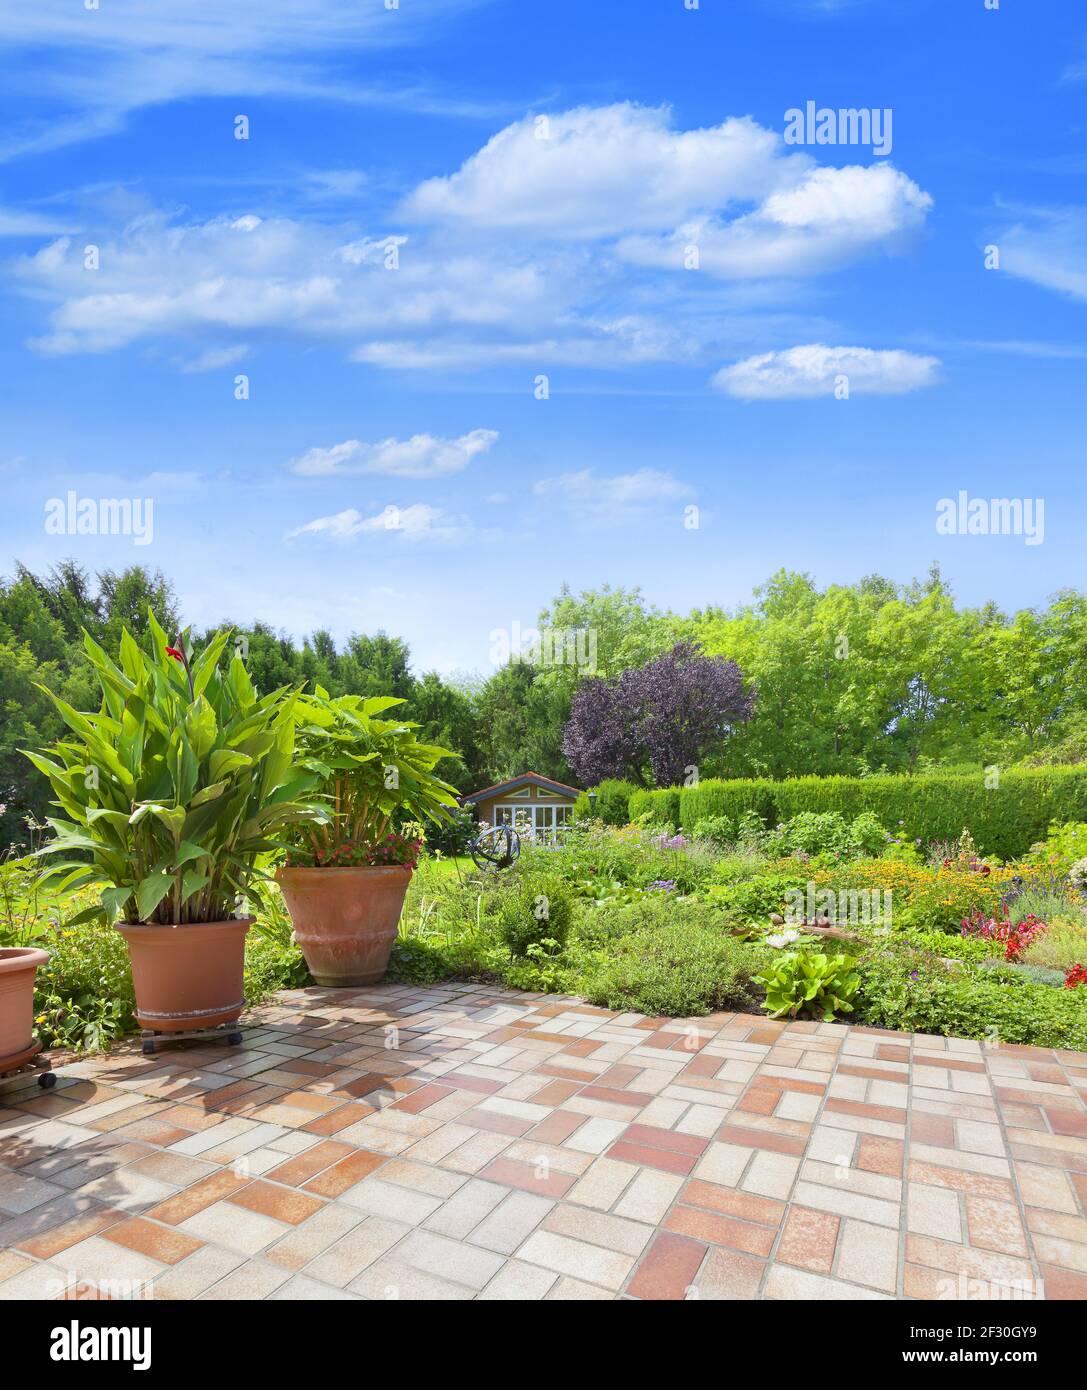 Beautiful, well-kept garden terrace with a colorful flowerbed and garden pond. Stock Photo